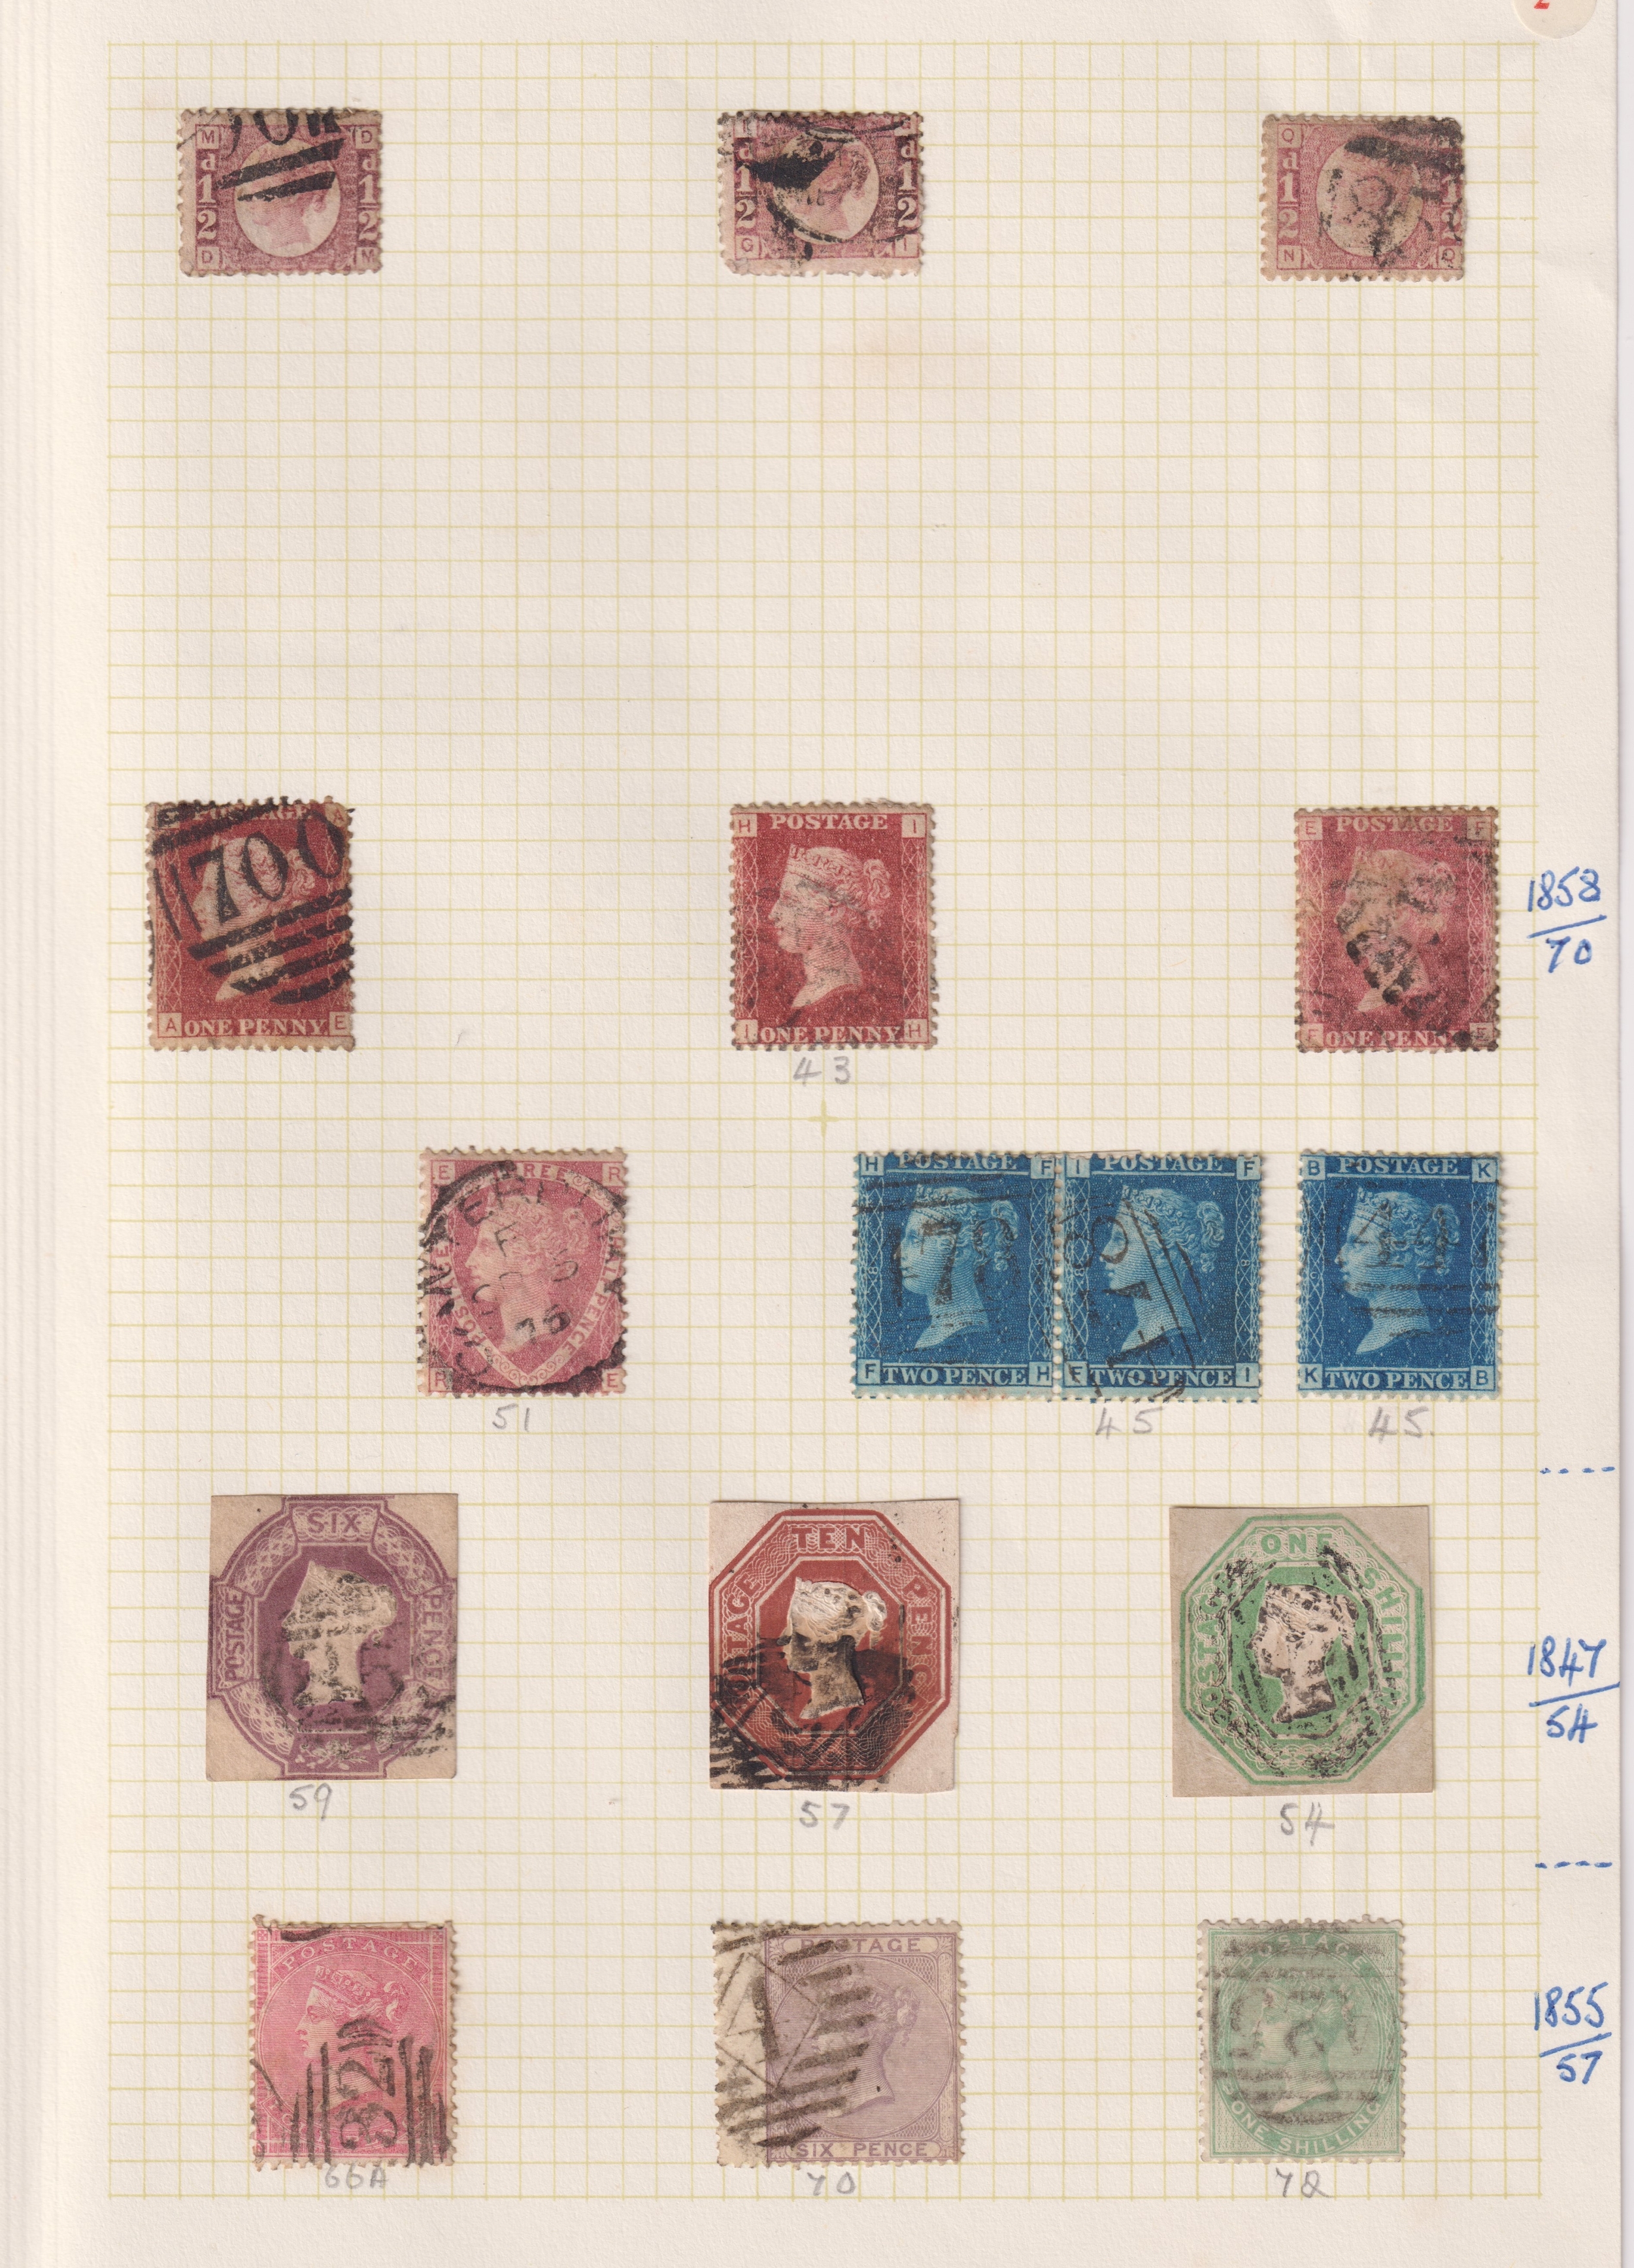 Stamps- A collection of Queen Victoria GB used stamps on six album pages from 1840 penny black to - Image 3 of 6